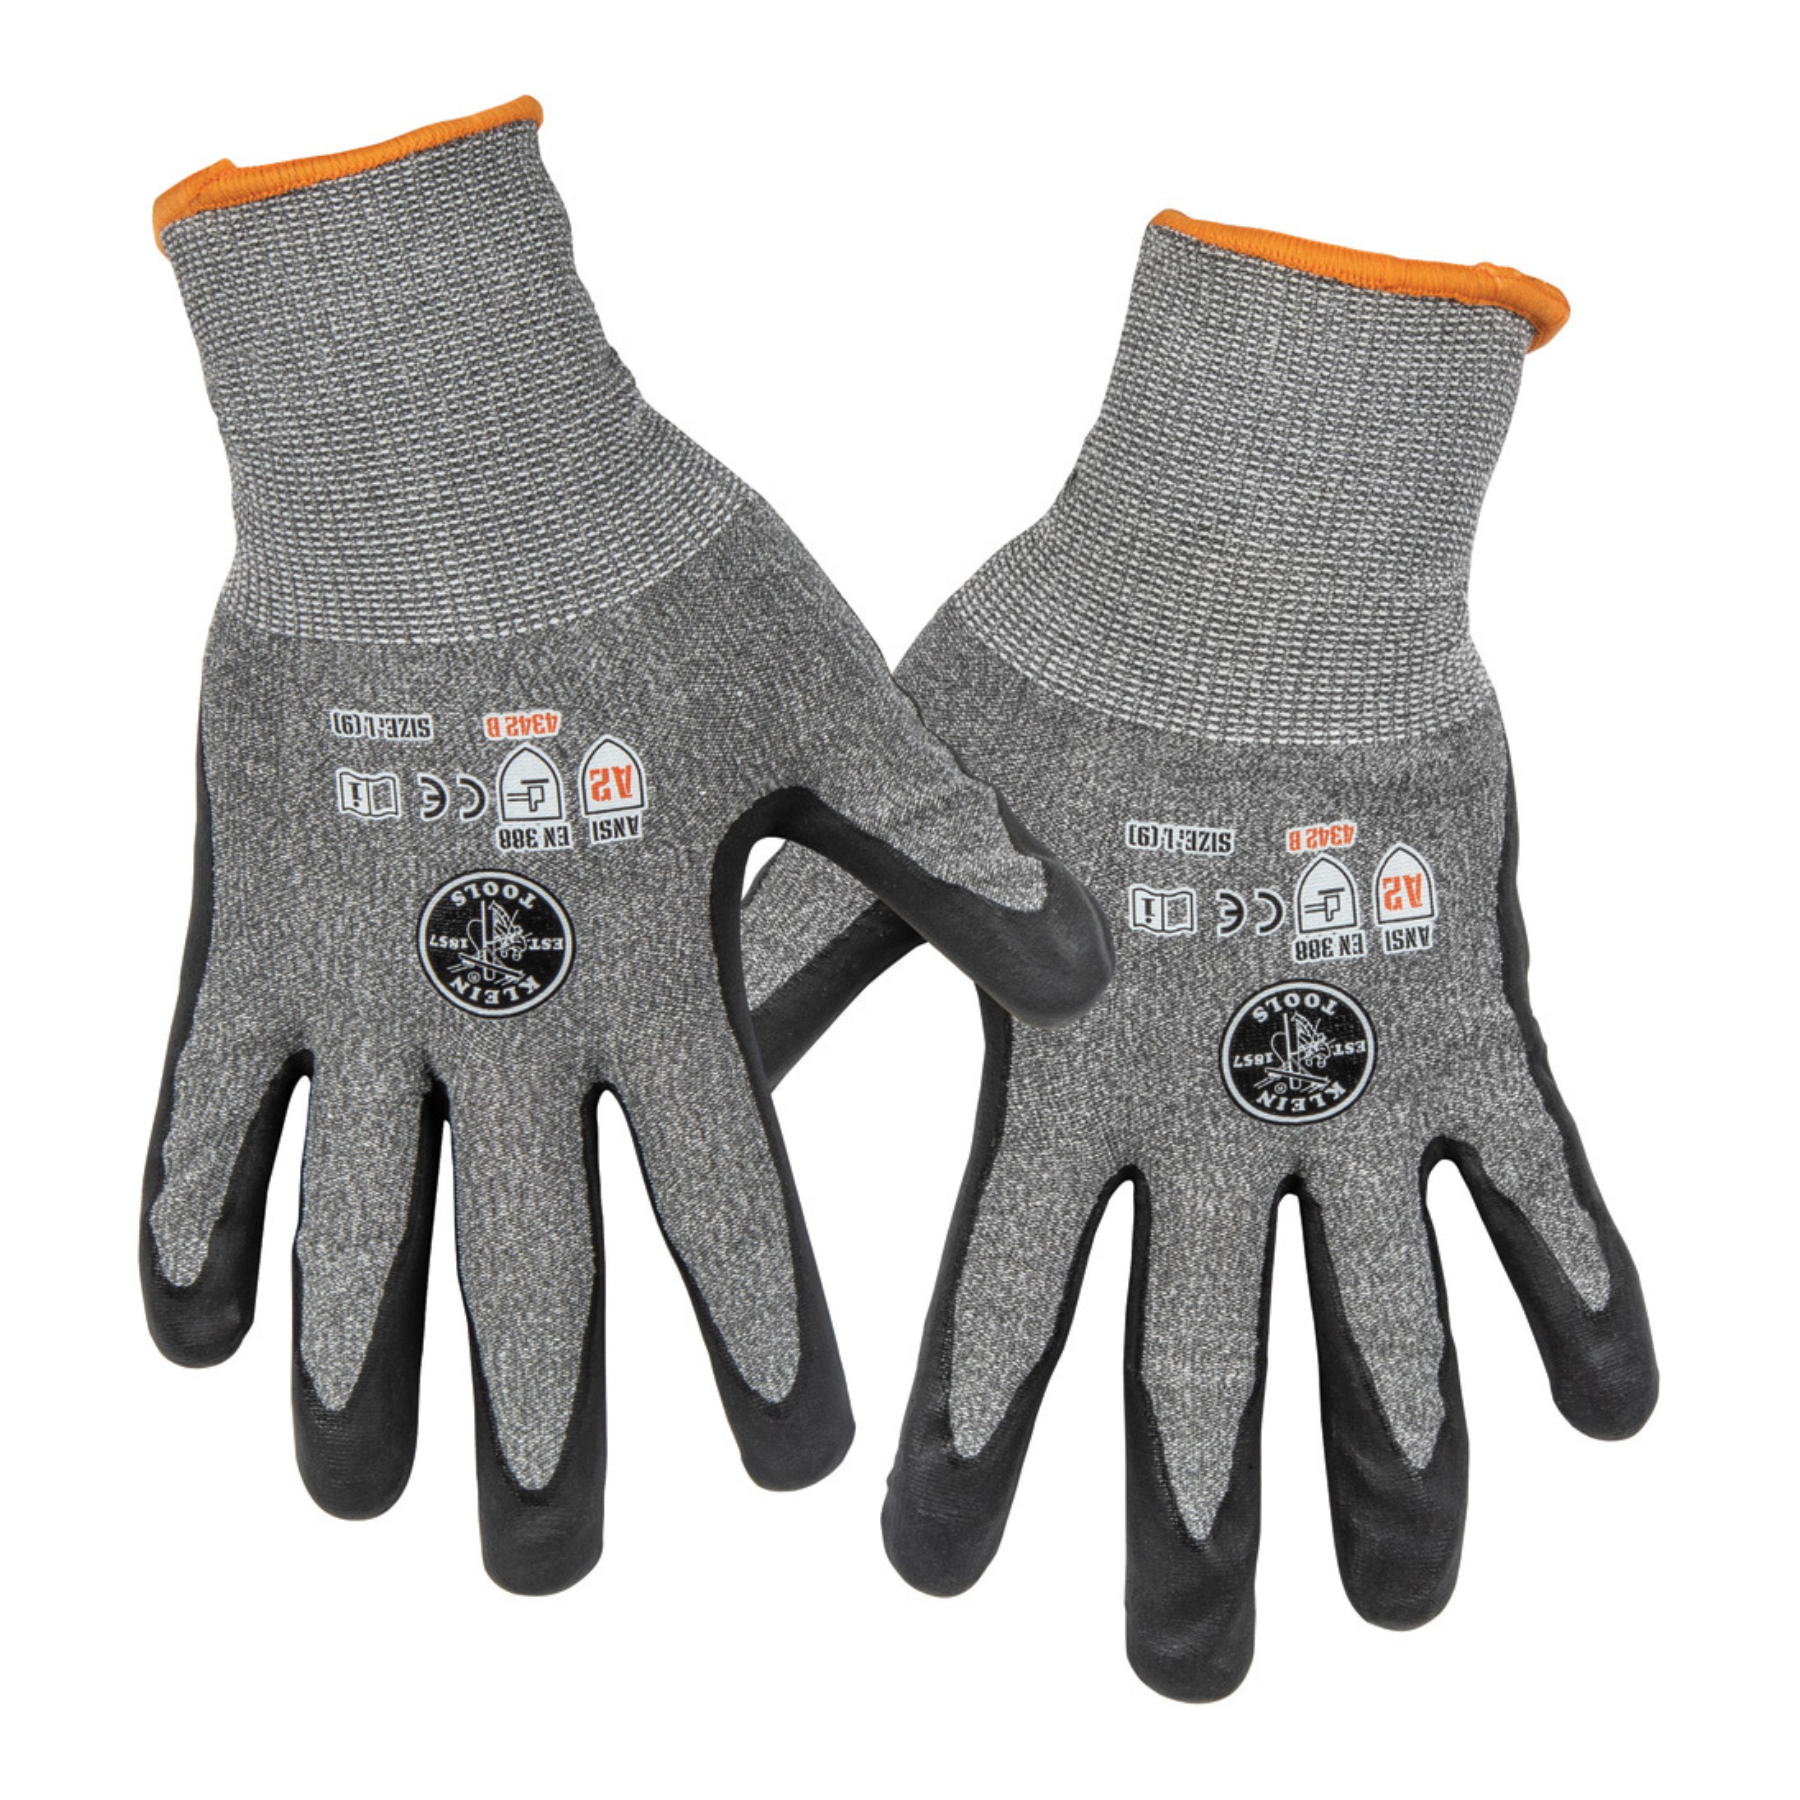 Work Gloves, Cut Level 2, Touchscreen, Large, 2-Pair Cut 2 Work Gloves keep you connected and protected with touchscreen-capable fingertips. Nitrile dip technology provides superior grip. ANSI rated for A2 Cut Resistance, these durable gloves protect your hands on the jobsite. Seamless knit cuff provides comfortable fit.